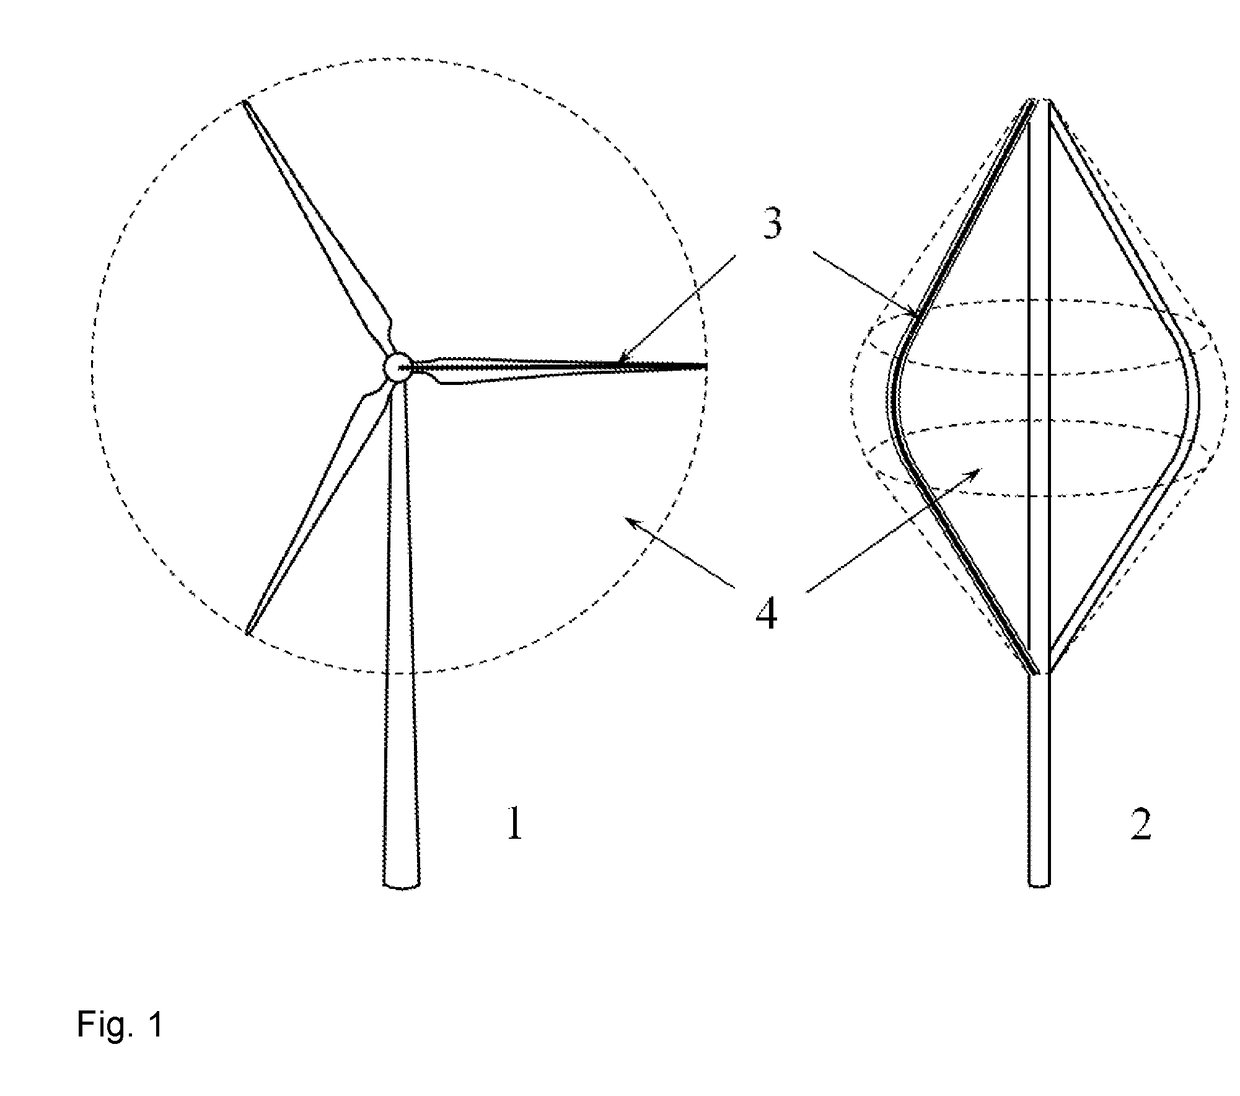 System and method for preventing collisions between wind turbine blades and flying objects